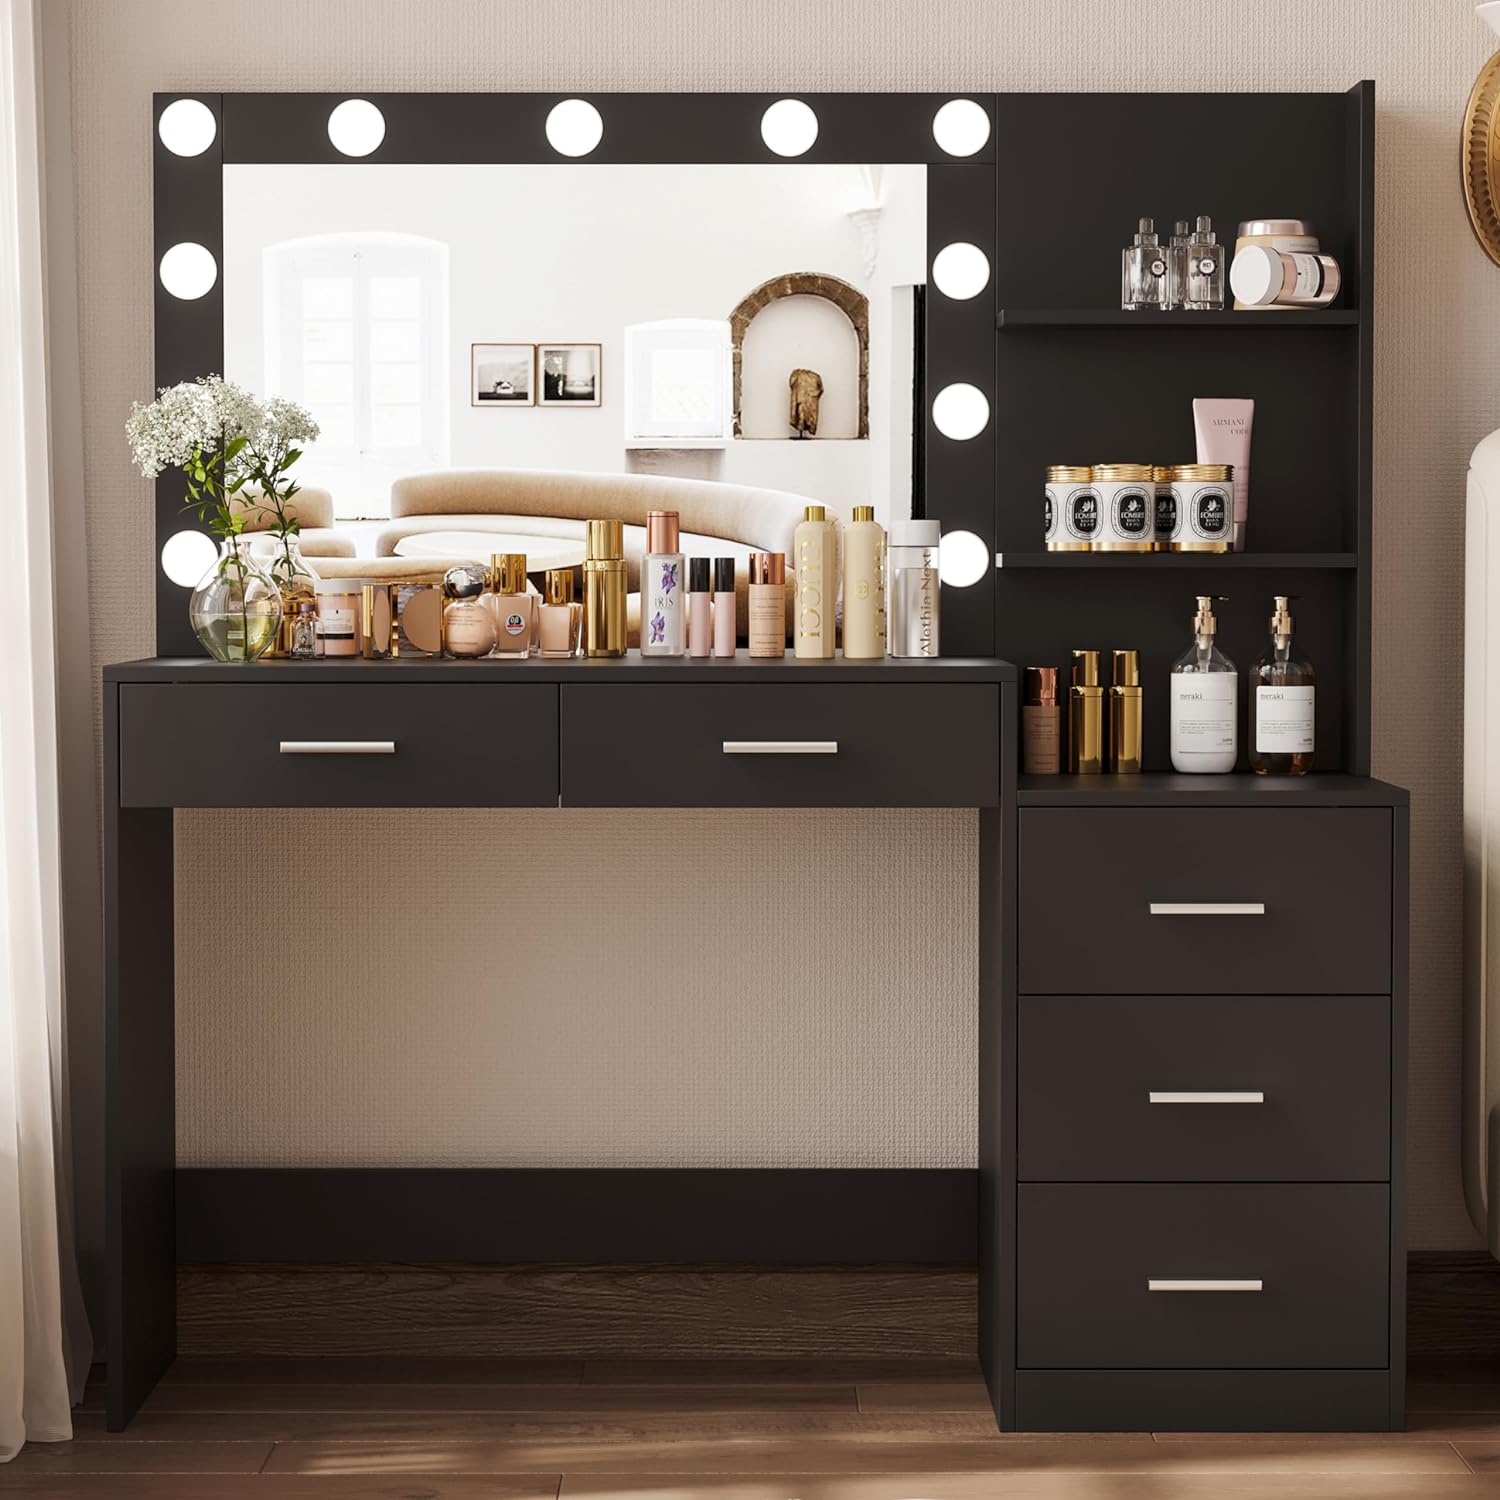 This vanity was exactly what I was looking for And looks absolutely amazing in my 13 year old daughter' room. It is durable and actually quality made, I was afraid I was gonna get a bunch of particle board crap but this was by far the opposite of that. It was a great value for my money but all of the reviews are correct it is absolutely a total pain to put together. If you have someone that loves to put things together this is the job for them it took us about 4 hours to assemble but it was wel